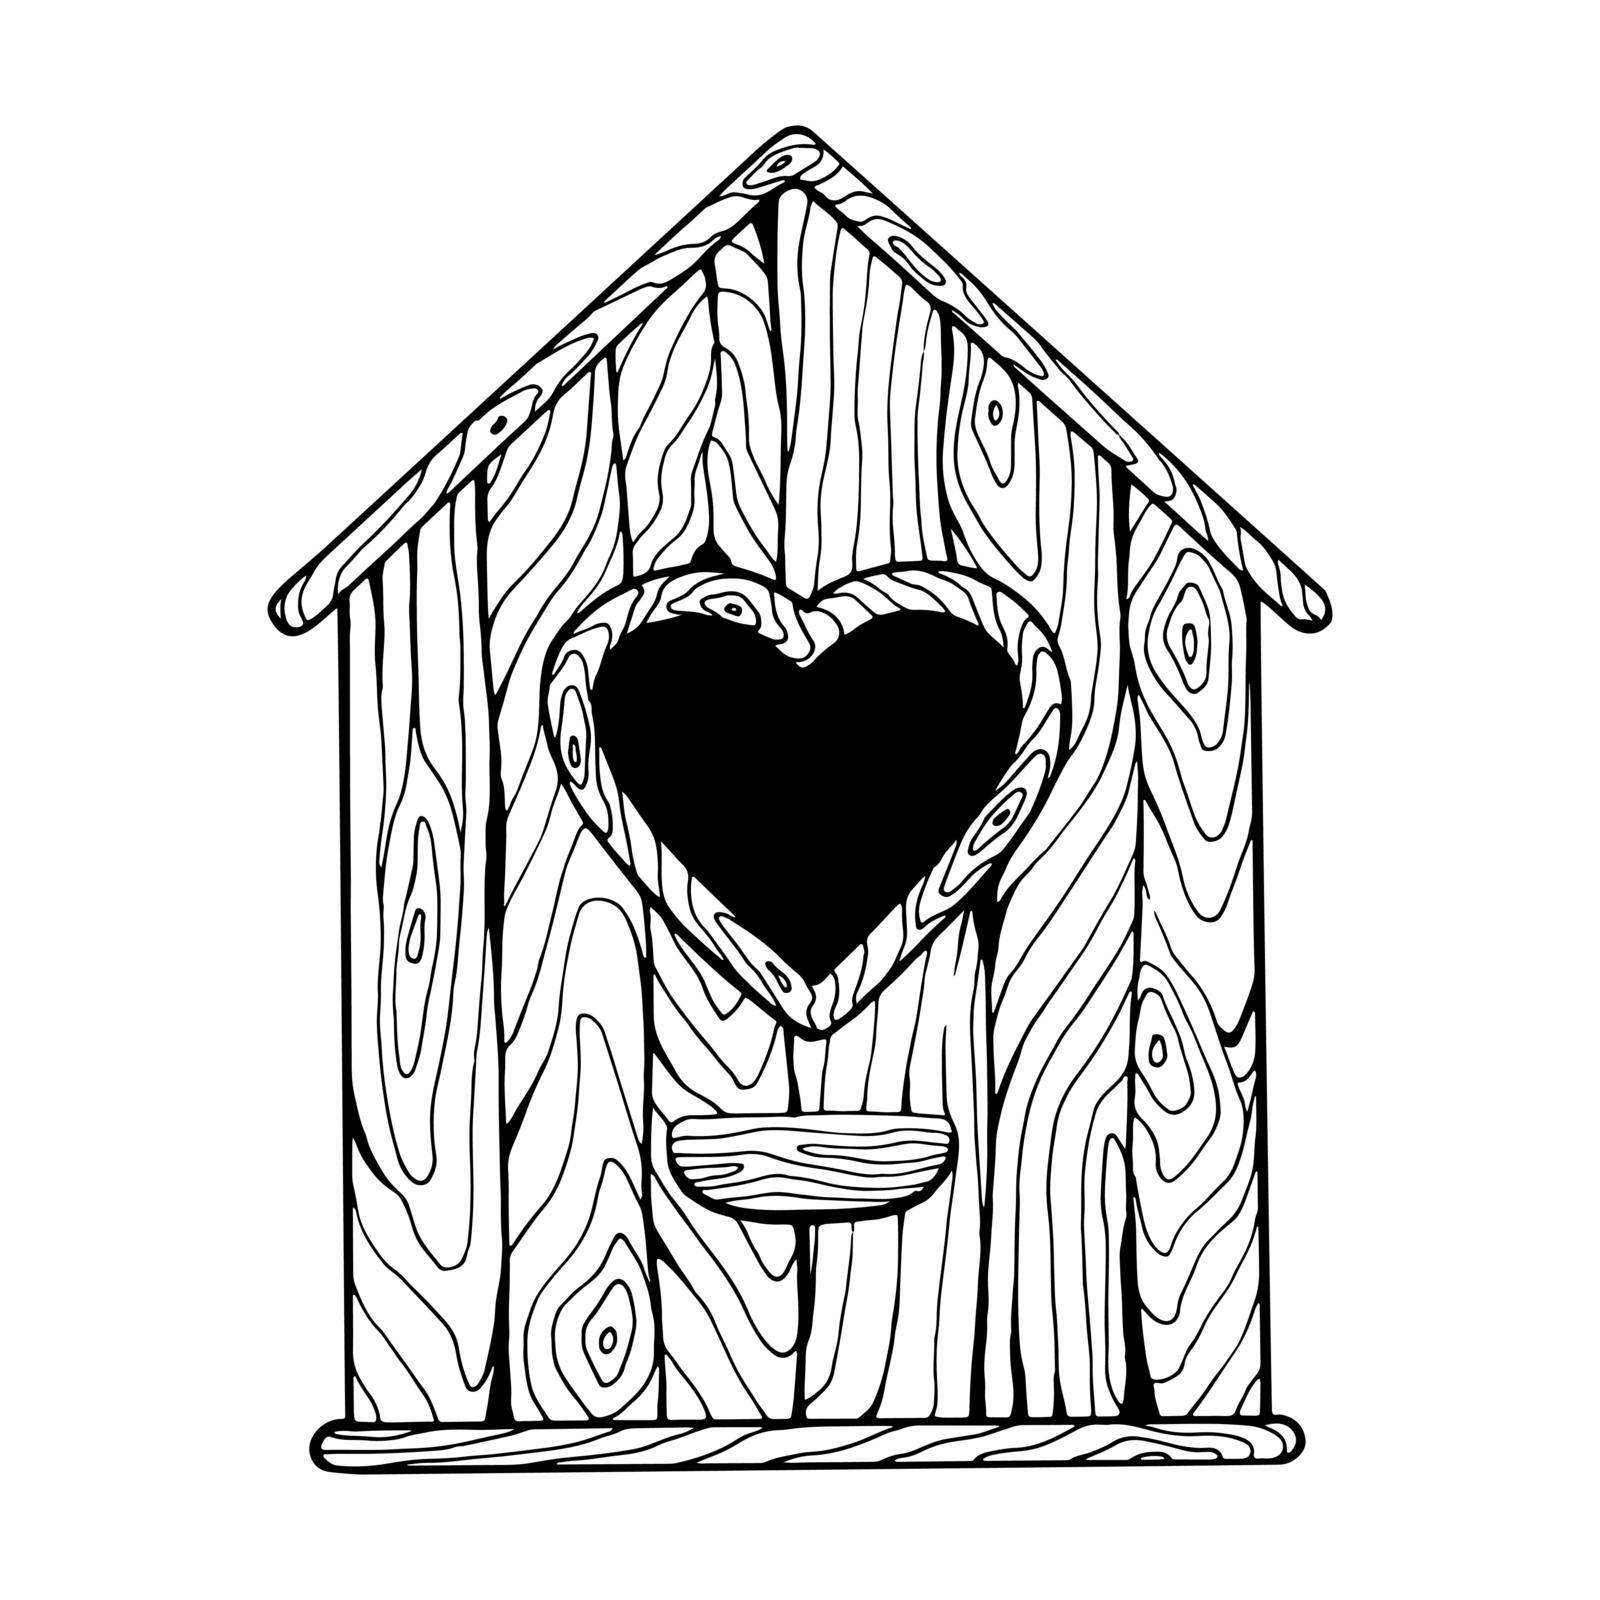 Coloring book birdhouse line art. Retro wooden house for birds. Hand drawn vector black and white illustration.